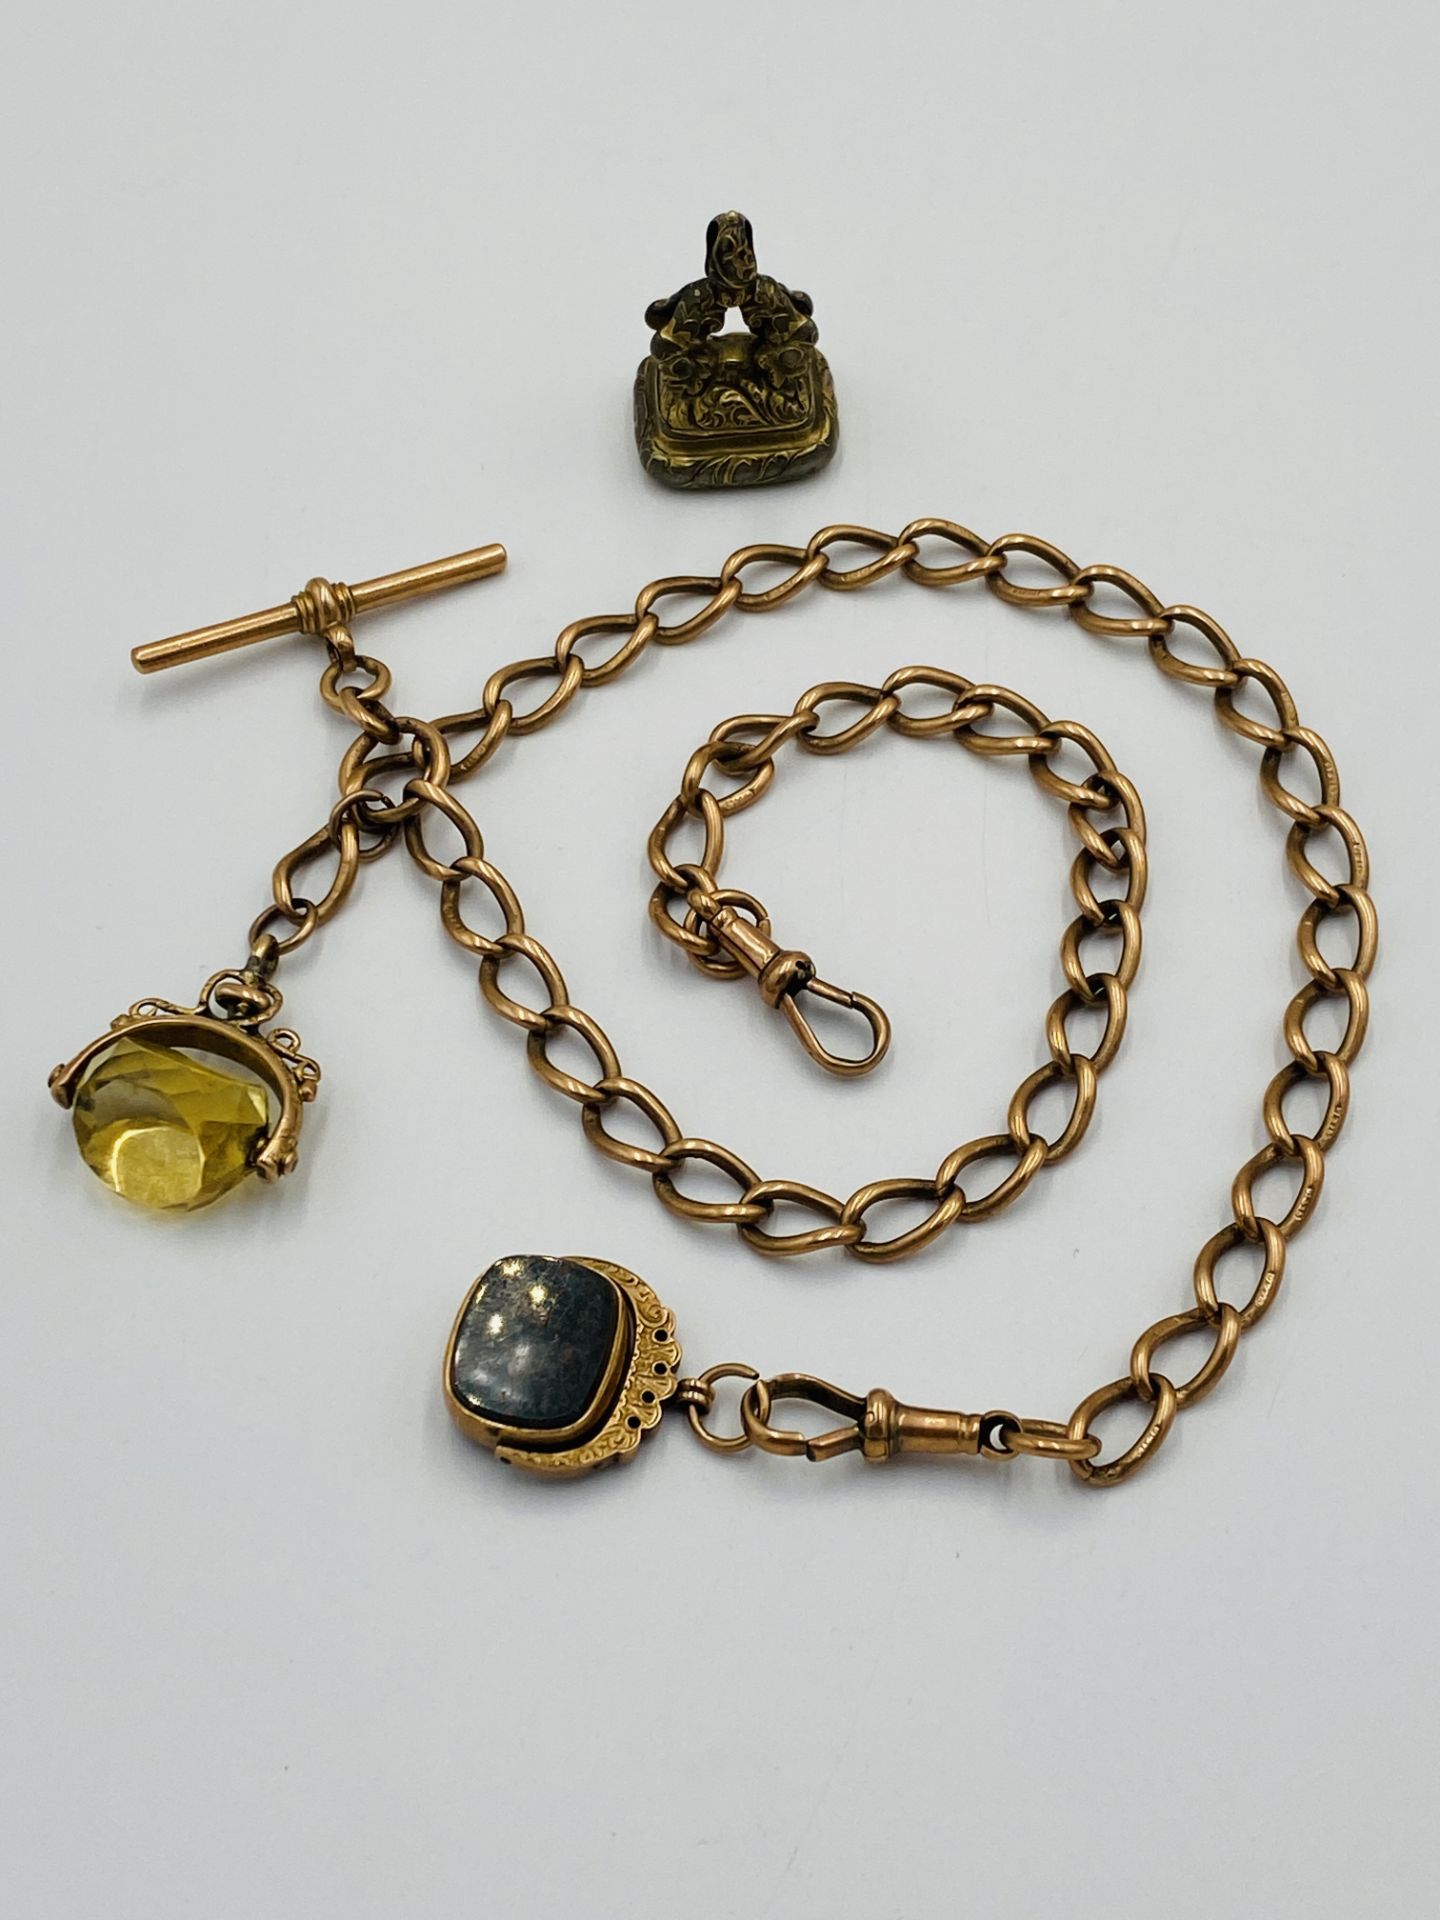 9ct gold fob chain with two fobs - Image 6 of 7